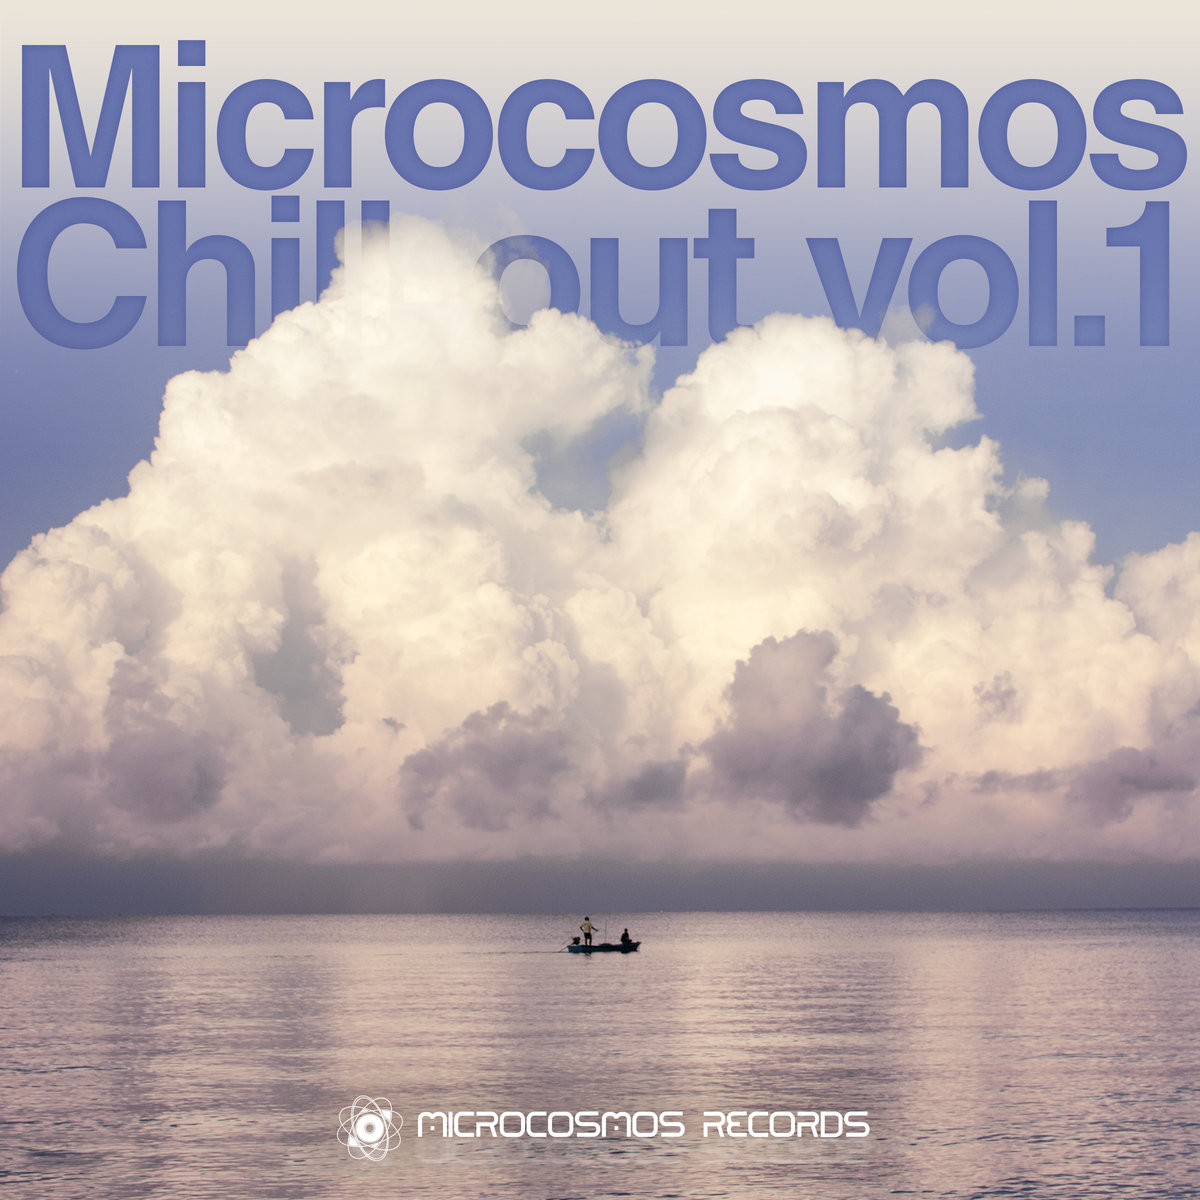 Dimmat - Tsixlionta @ 'Various Artists - Microcosmos Chill-out Vol.1' album (ambient, chill-out)